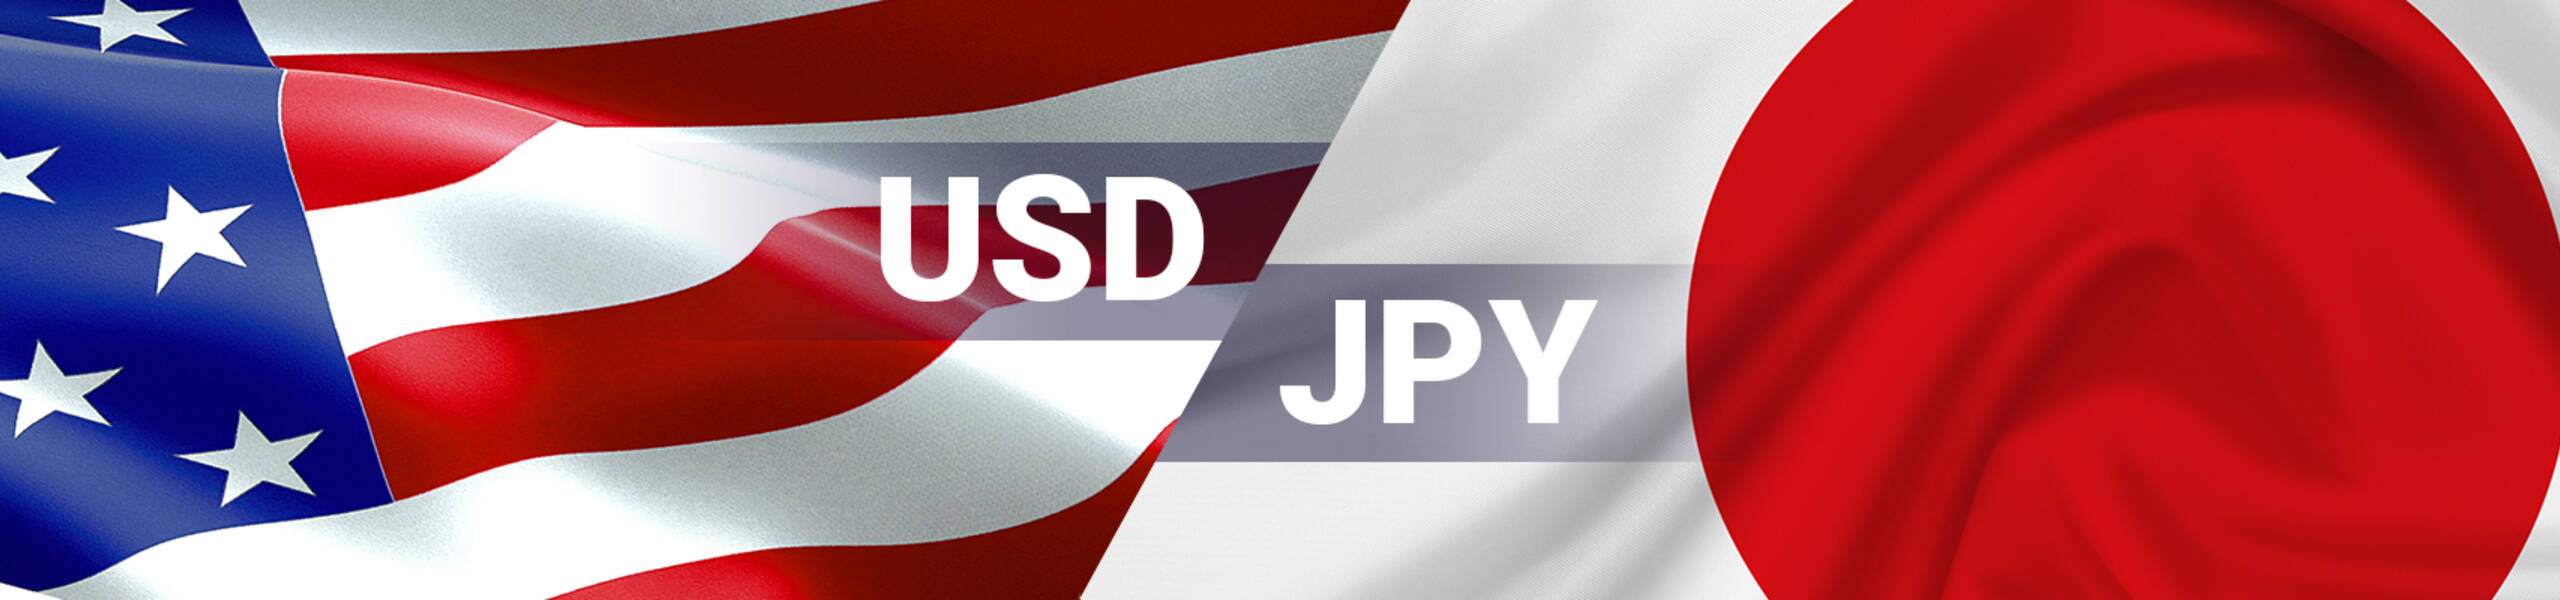 USD/JPY Dailyレポート 2018/03/15